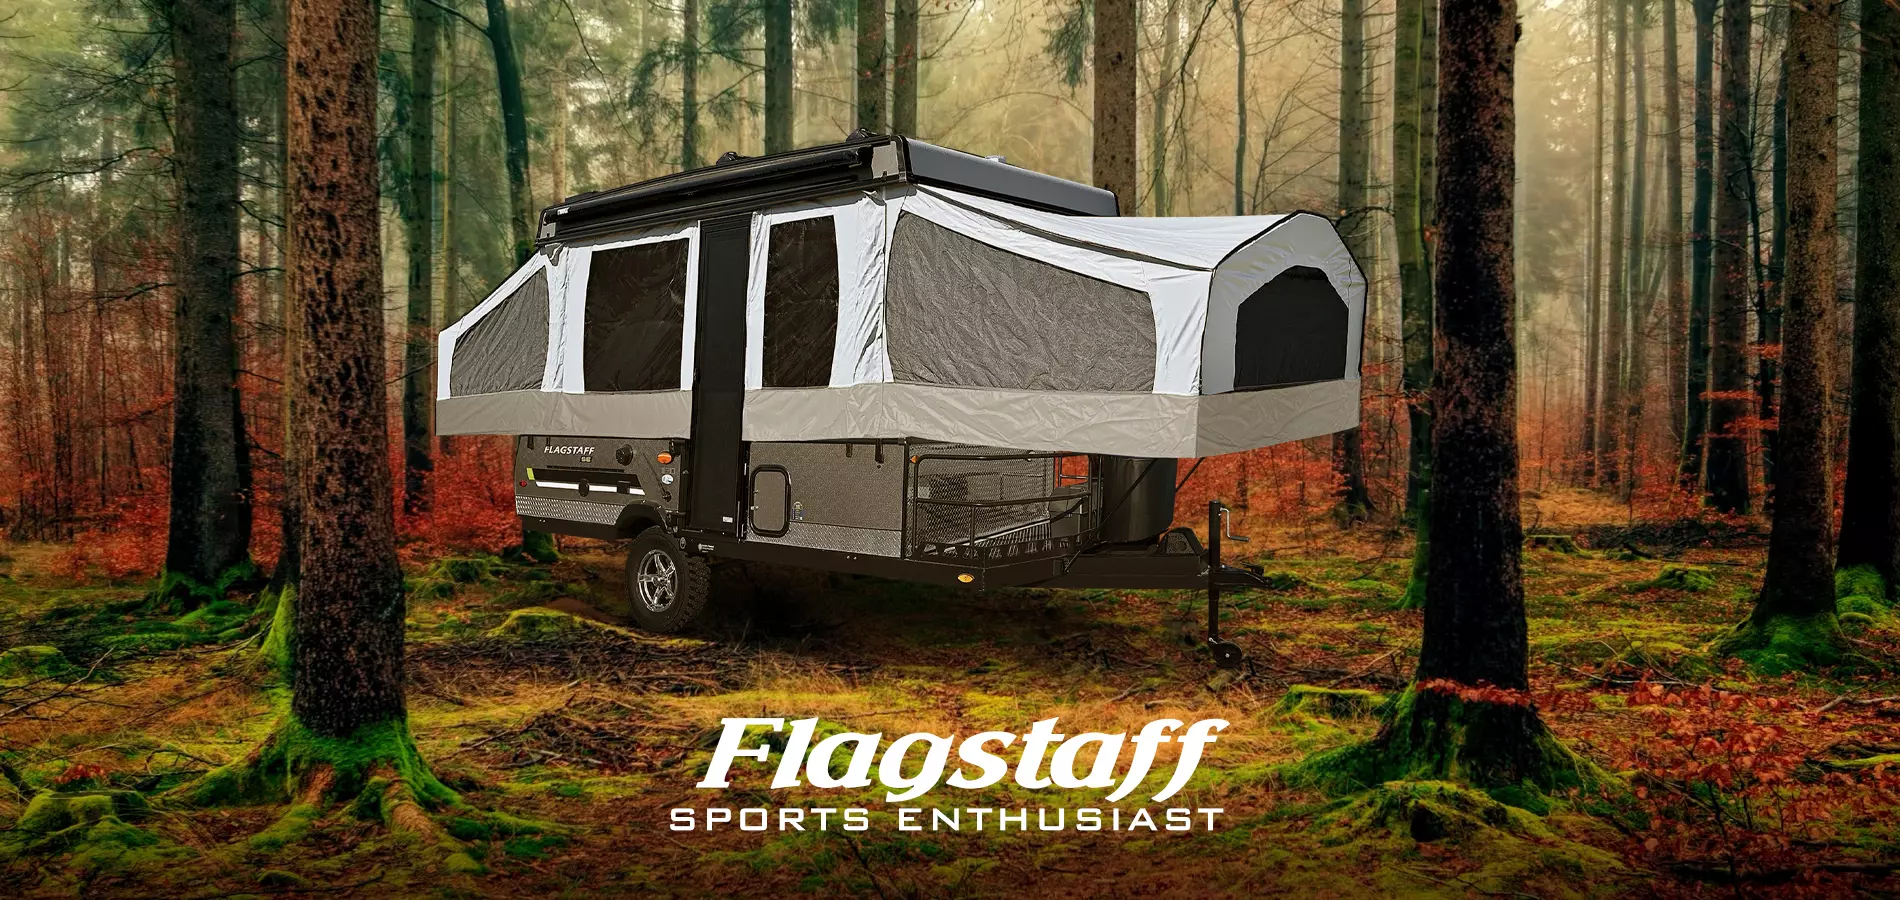 Flagstaff Sports Enthusiast Package RVs